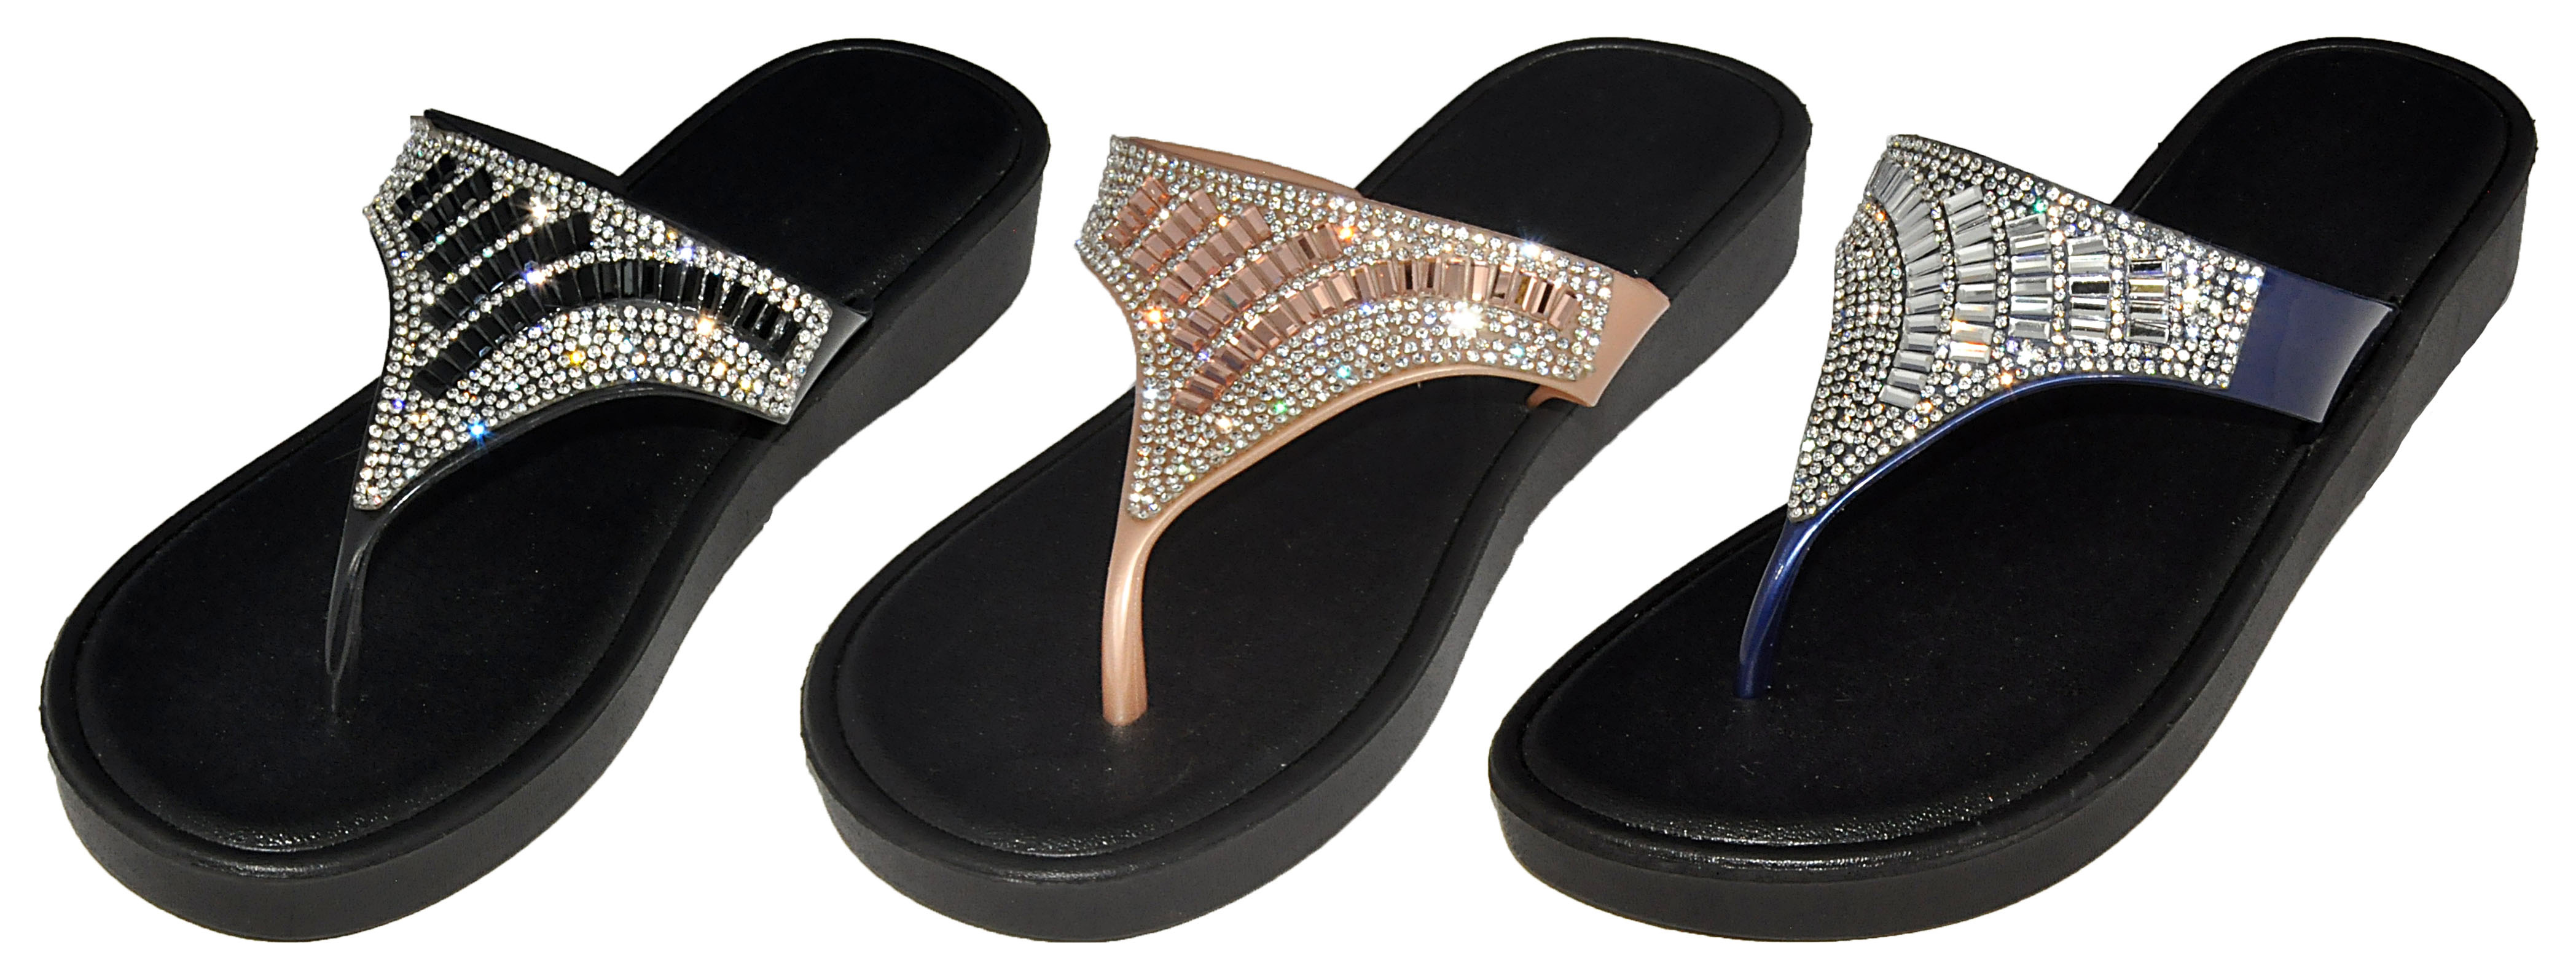 Women's Wedge Thong Flip Flop SANDALS w/ Embroidered Rhinestones & Jewels